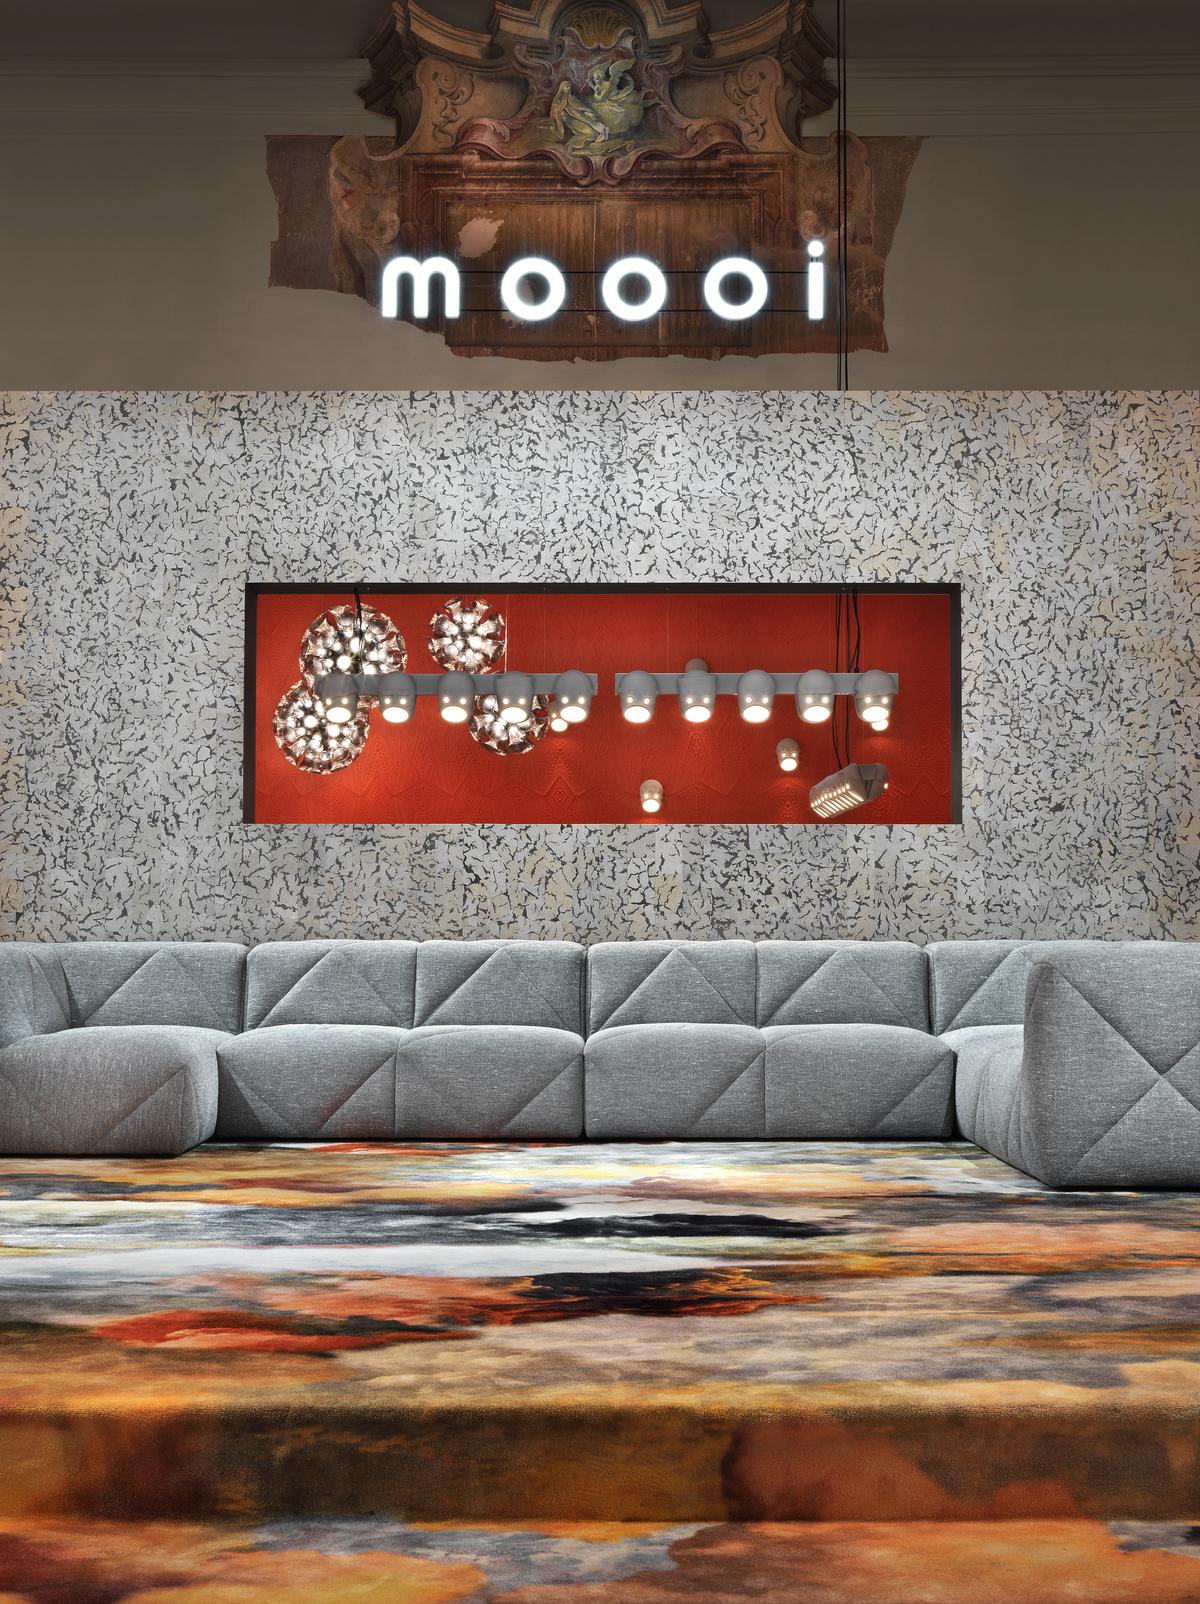 Moooi BFF Triple Seater TE01 Low Sofa in Dodo Pavone Jacquard White Upholstery In New Condition For Sale In Brooklyn, NY